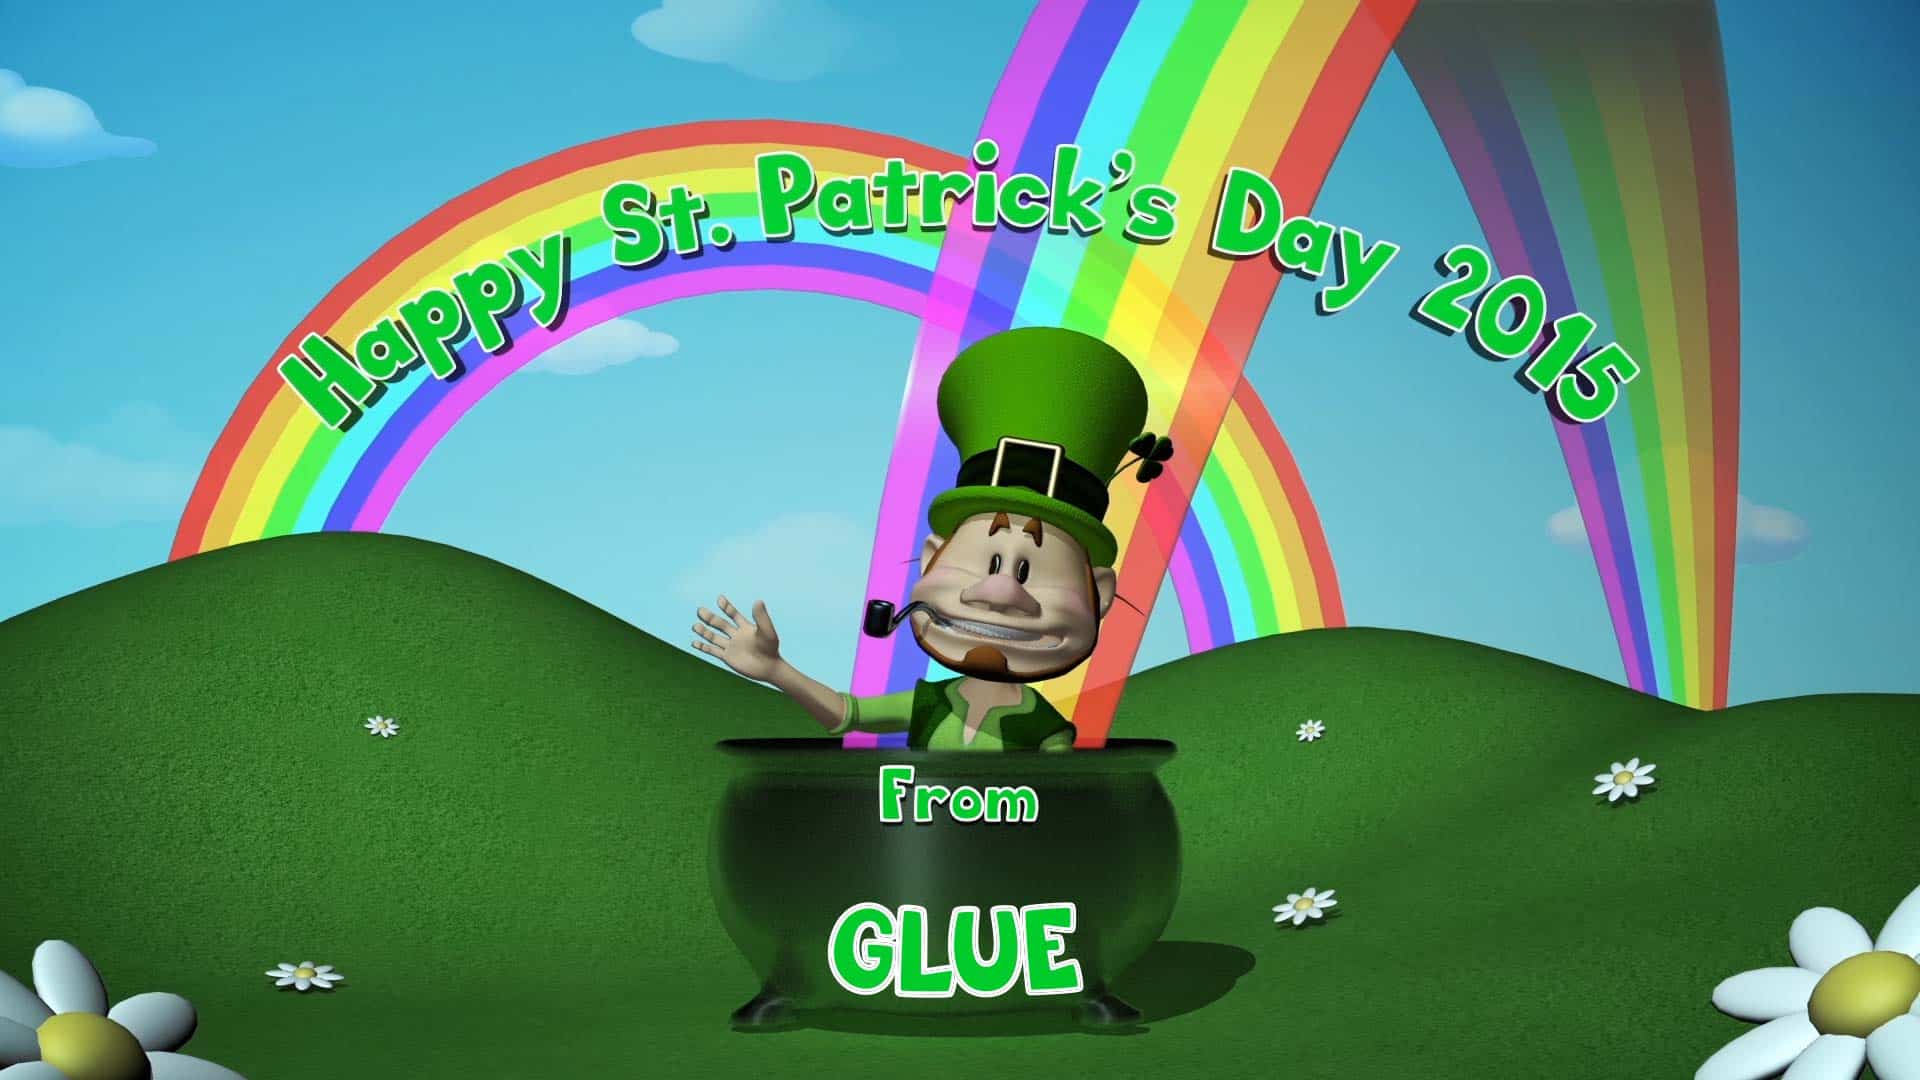 St. Patrick's Day Video - GLUE Visual Effects